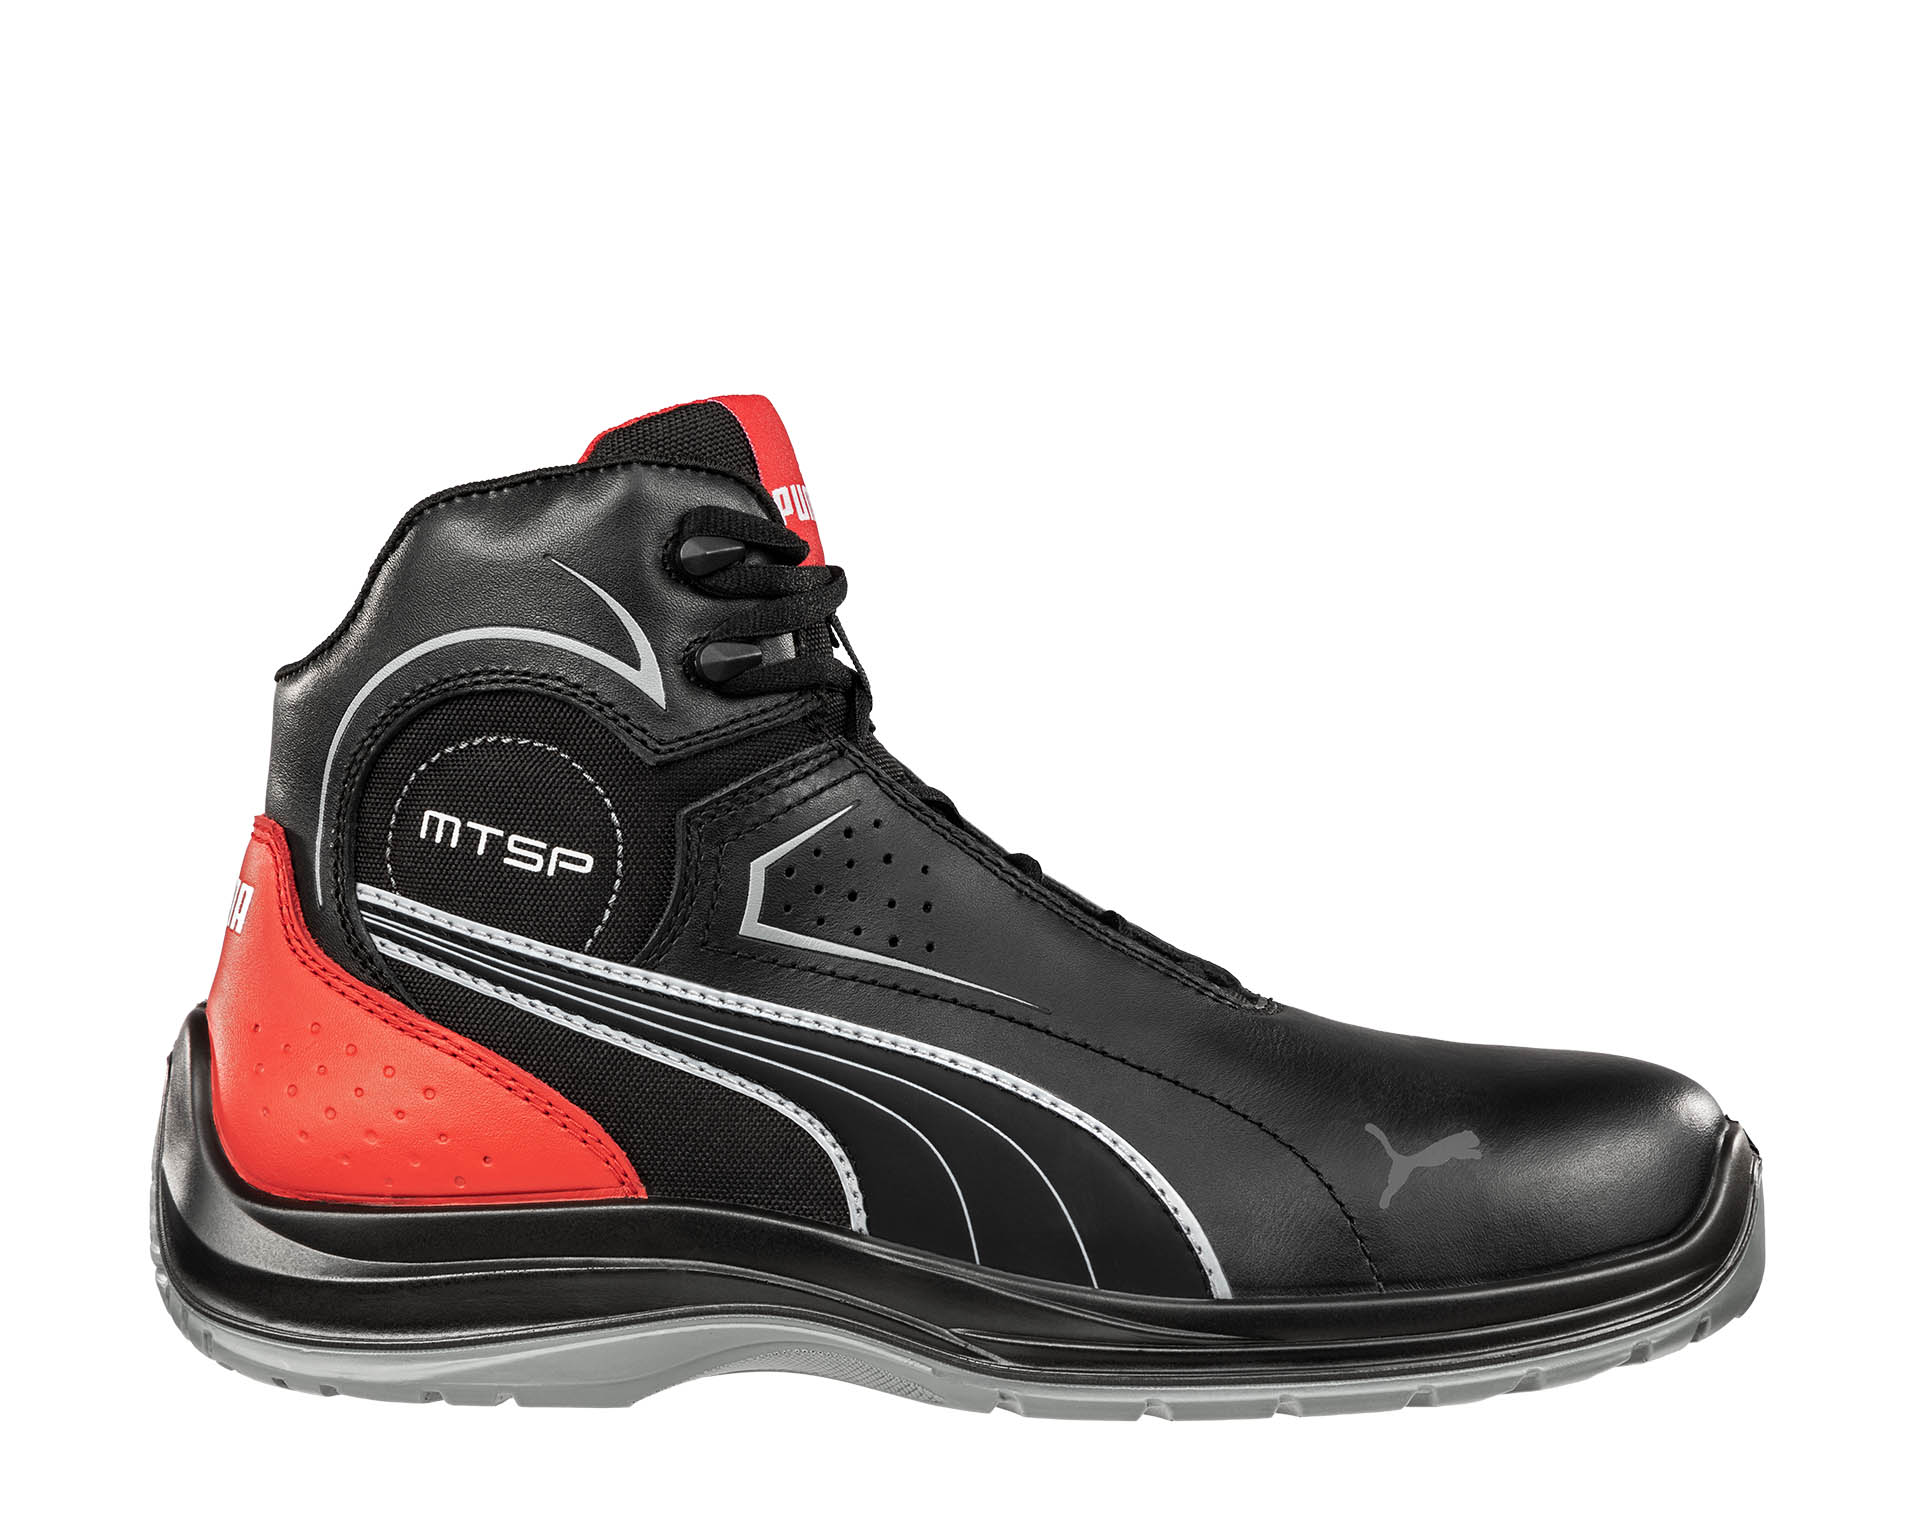 TOURING BLACK MID|PUMA SAFETY work shoes USA ASTM SR Safety | EH Puma